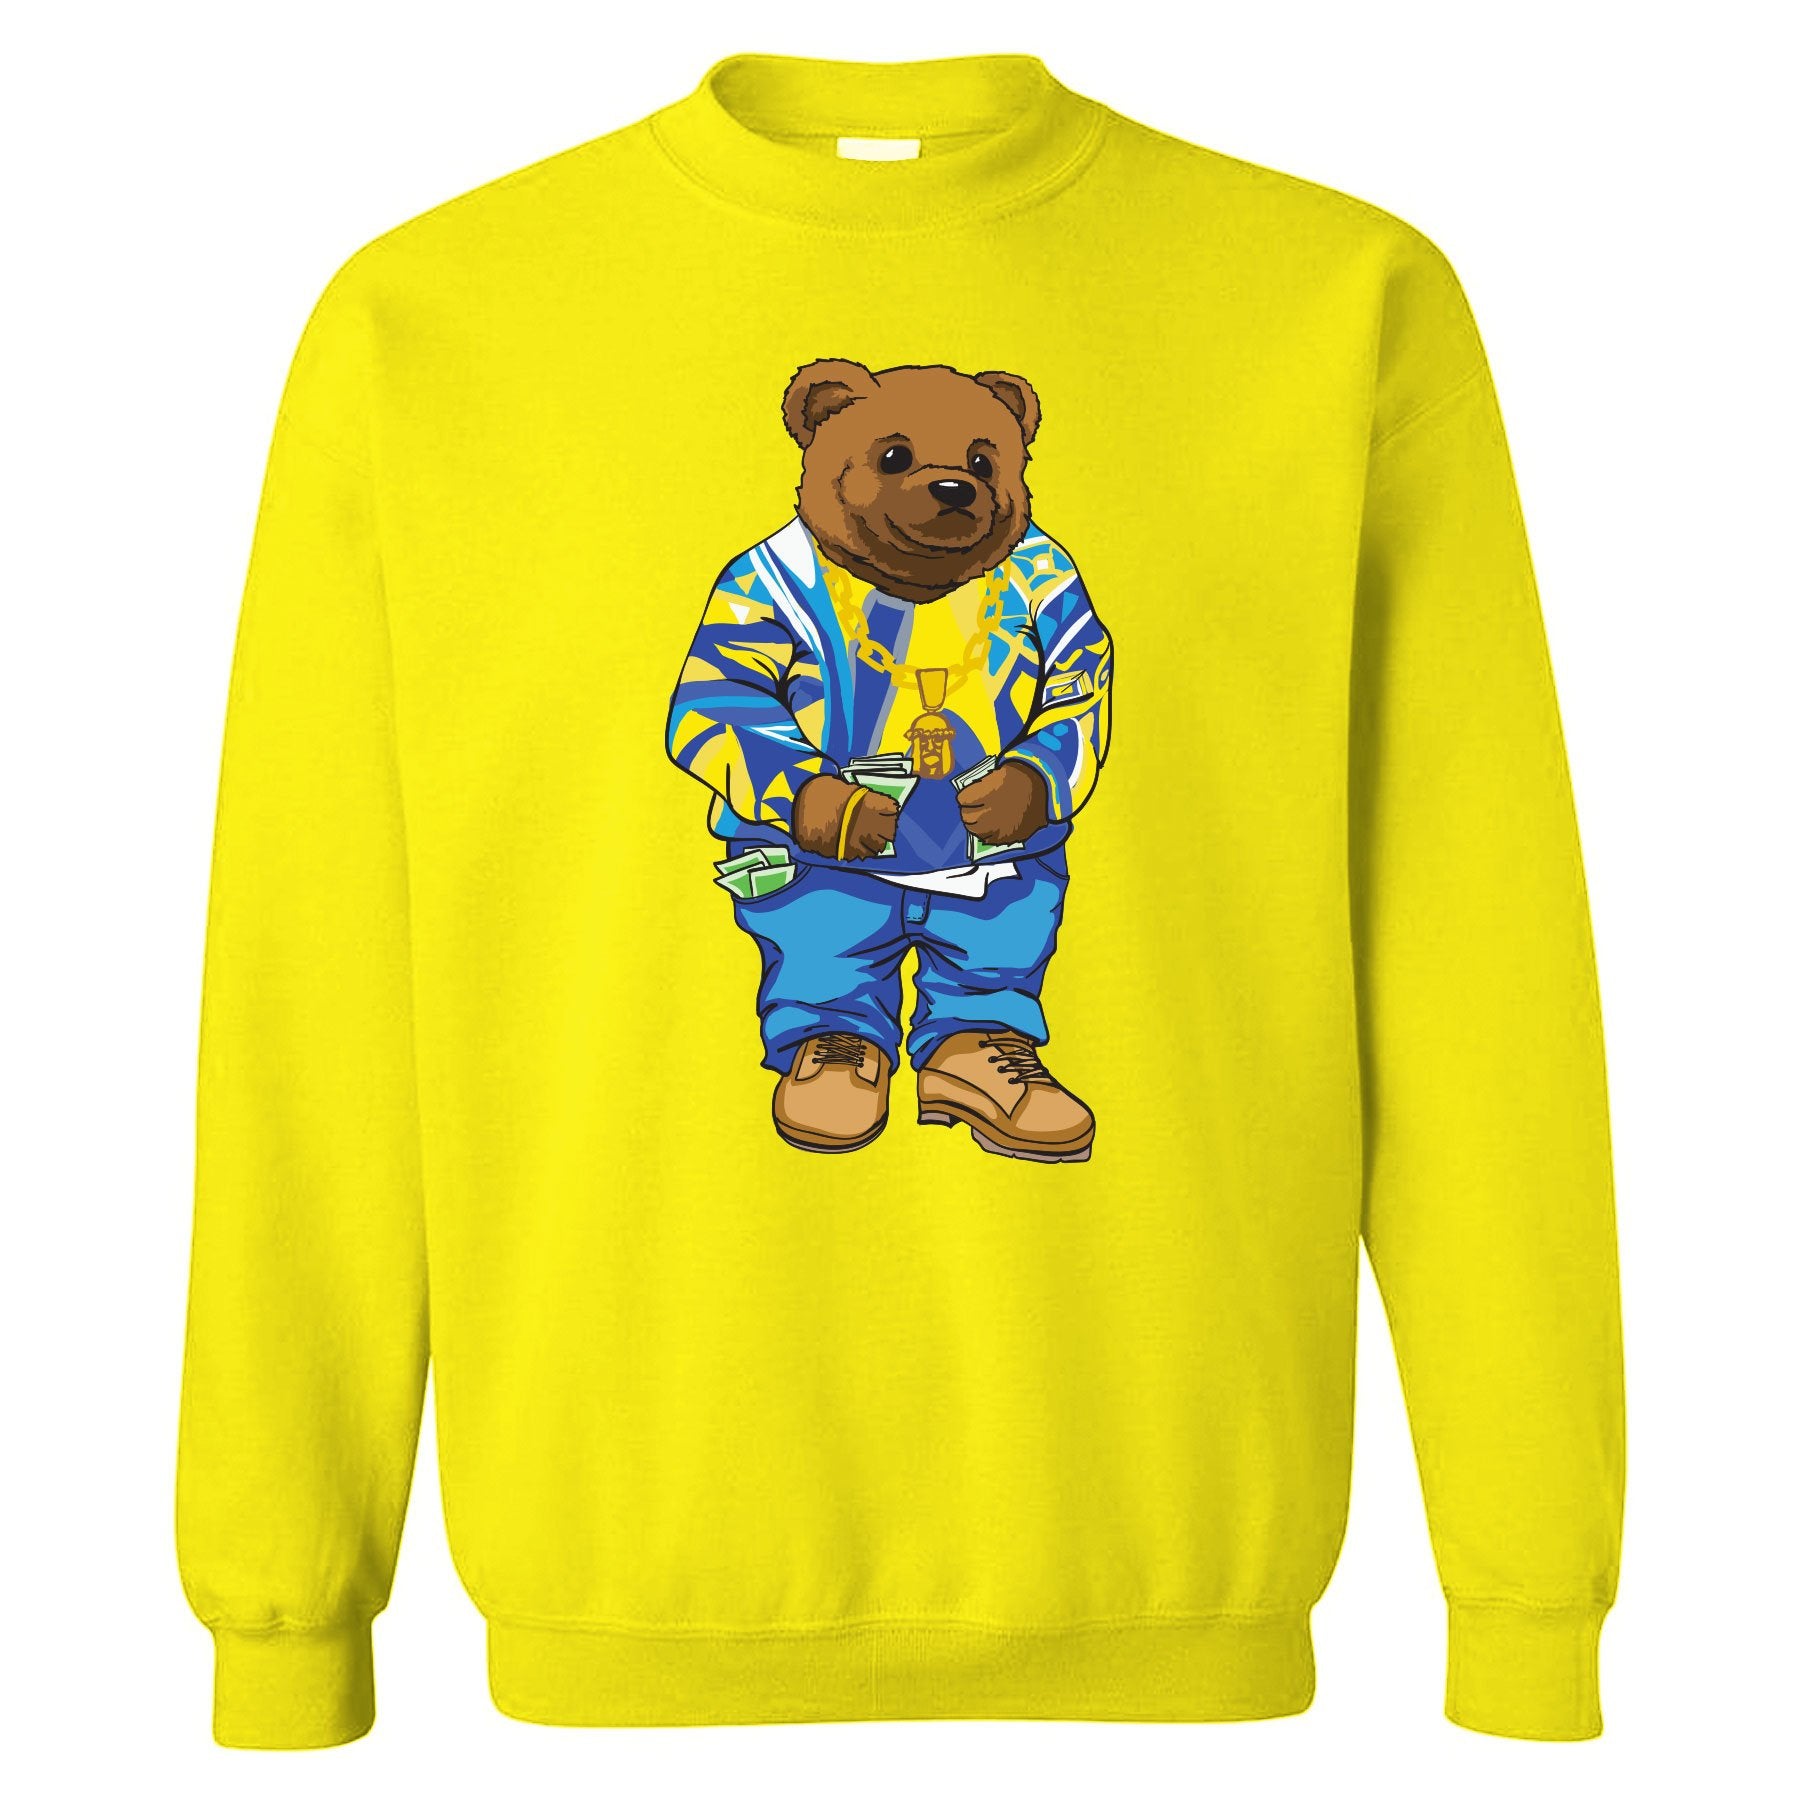 Printed on the front of the Air Jordan 5 Alternate Laney sneaker matching yellow crewneck is the Sweater Bear wearing a coogi sweater that matches the Air Jordan 5 Laney sneakers